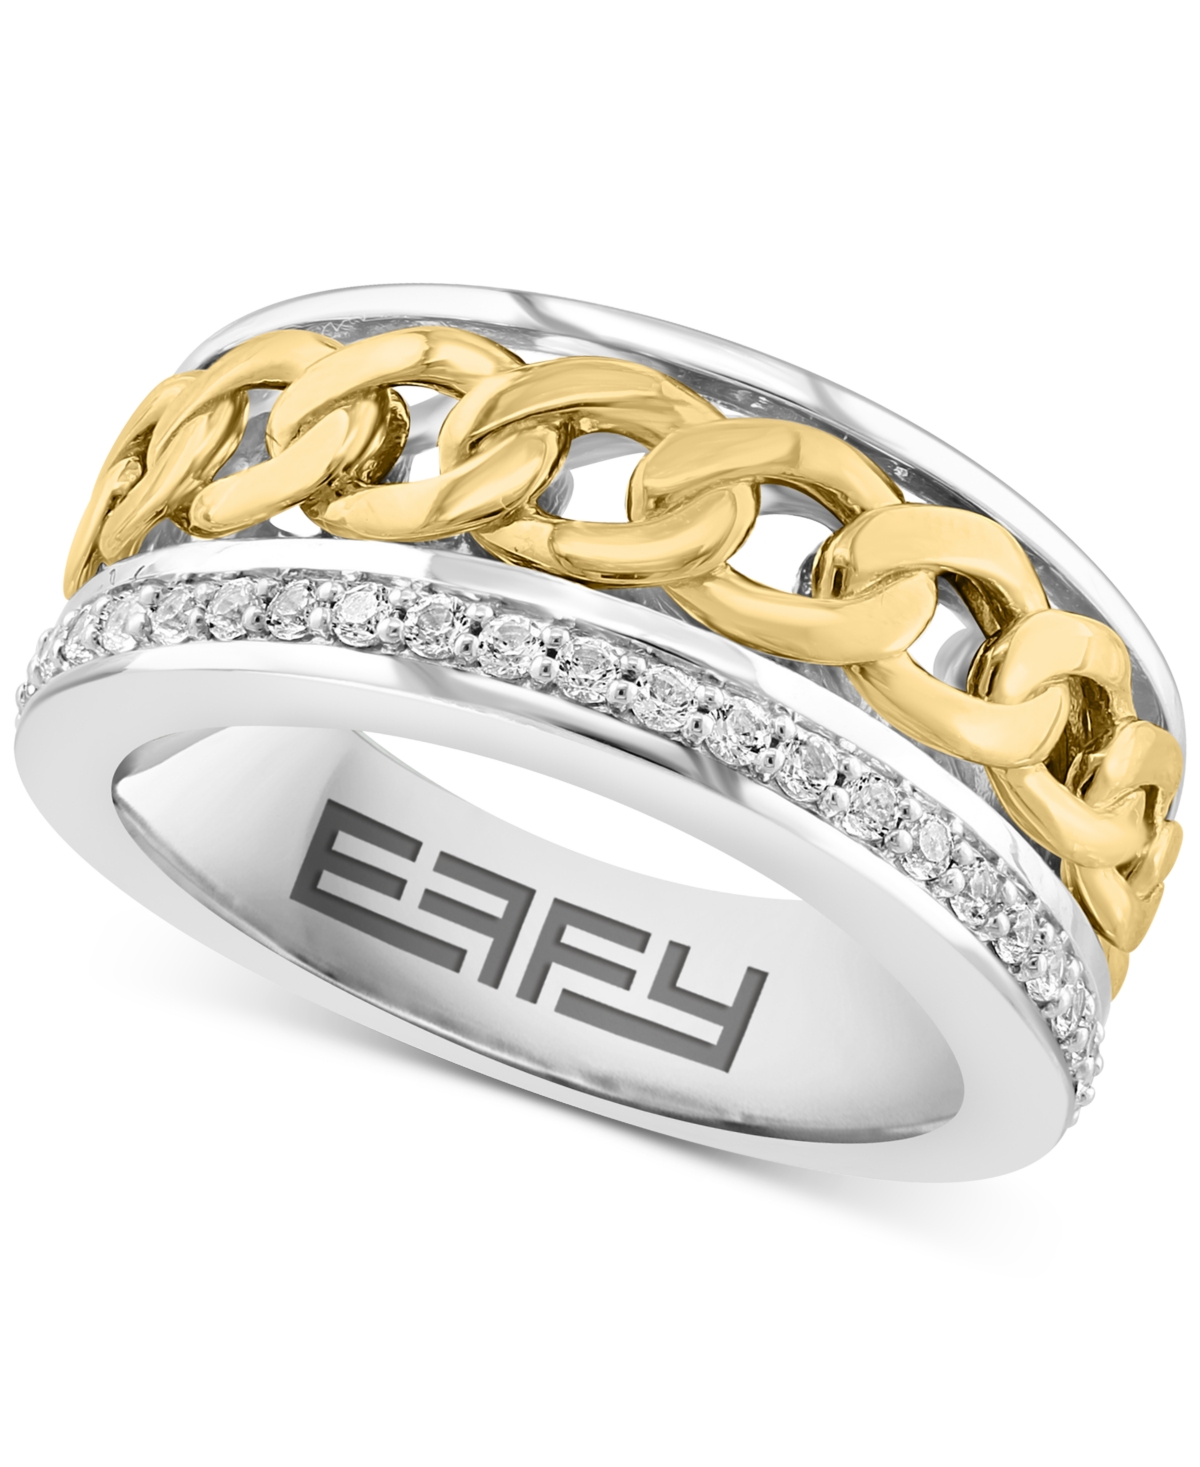 Effy Men's White Sapphire Chain Link Ring (1/2 ct. t.w.) in Sterling Silver and 14k Gold-Plate - Silver